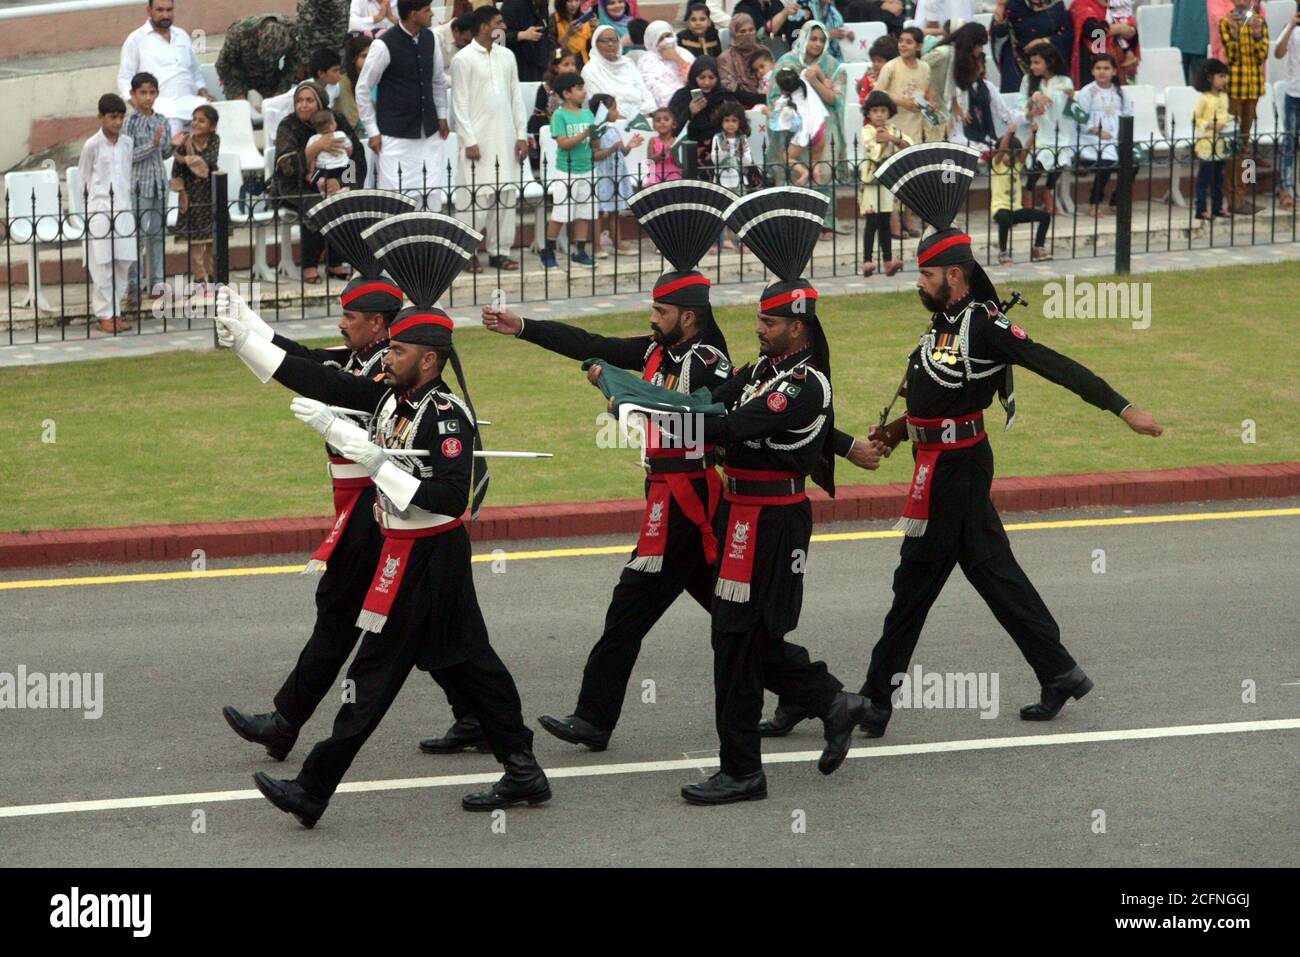 Punjab Rangers and soldiers in black uniform take a part of flag-lowering ceremony on the eve of Defense and Martyrs Day at the Joint Check Post (JCP) Wagah border in Lahore. Since the Partition of British India in 1947, Pakistan and India remained in contention over several issues. Although the Kashmir conflict was the predominant issue dividing the nations, other border disputes also existed, most notably over the Rann of Kutch, a barren region in the Indian state of Gujarat. The issue first arose in 1956 which ended with India regaining control over the disputed area. (Photo by Rana Sajid Stock Photo